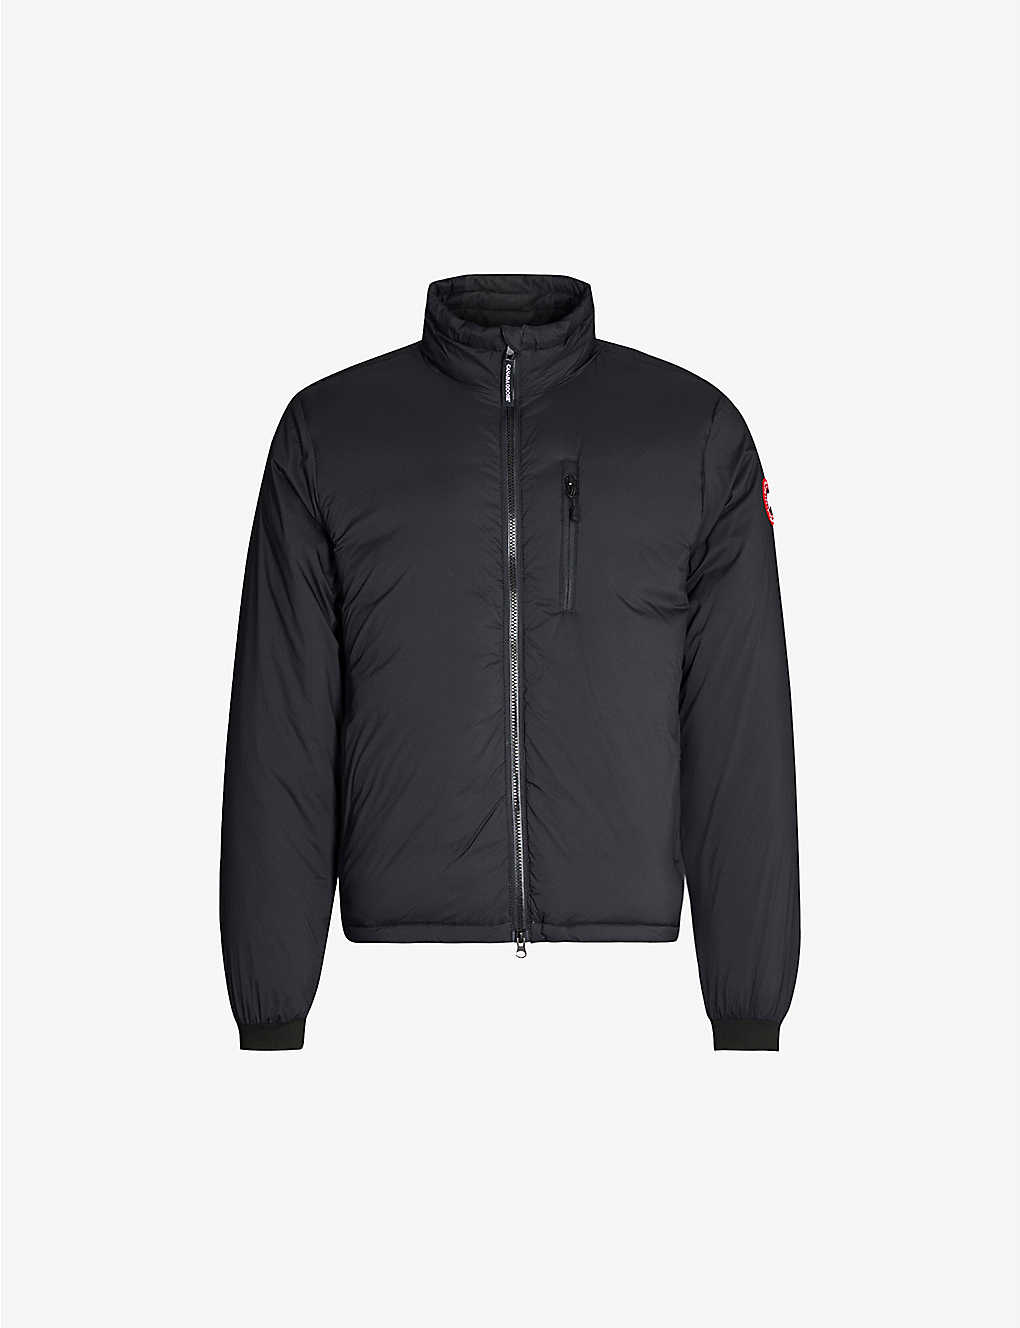 Shop Canada Goose Men's Black Lodge Quilted Shell Jacket